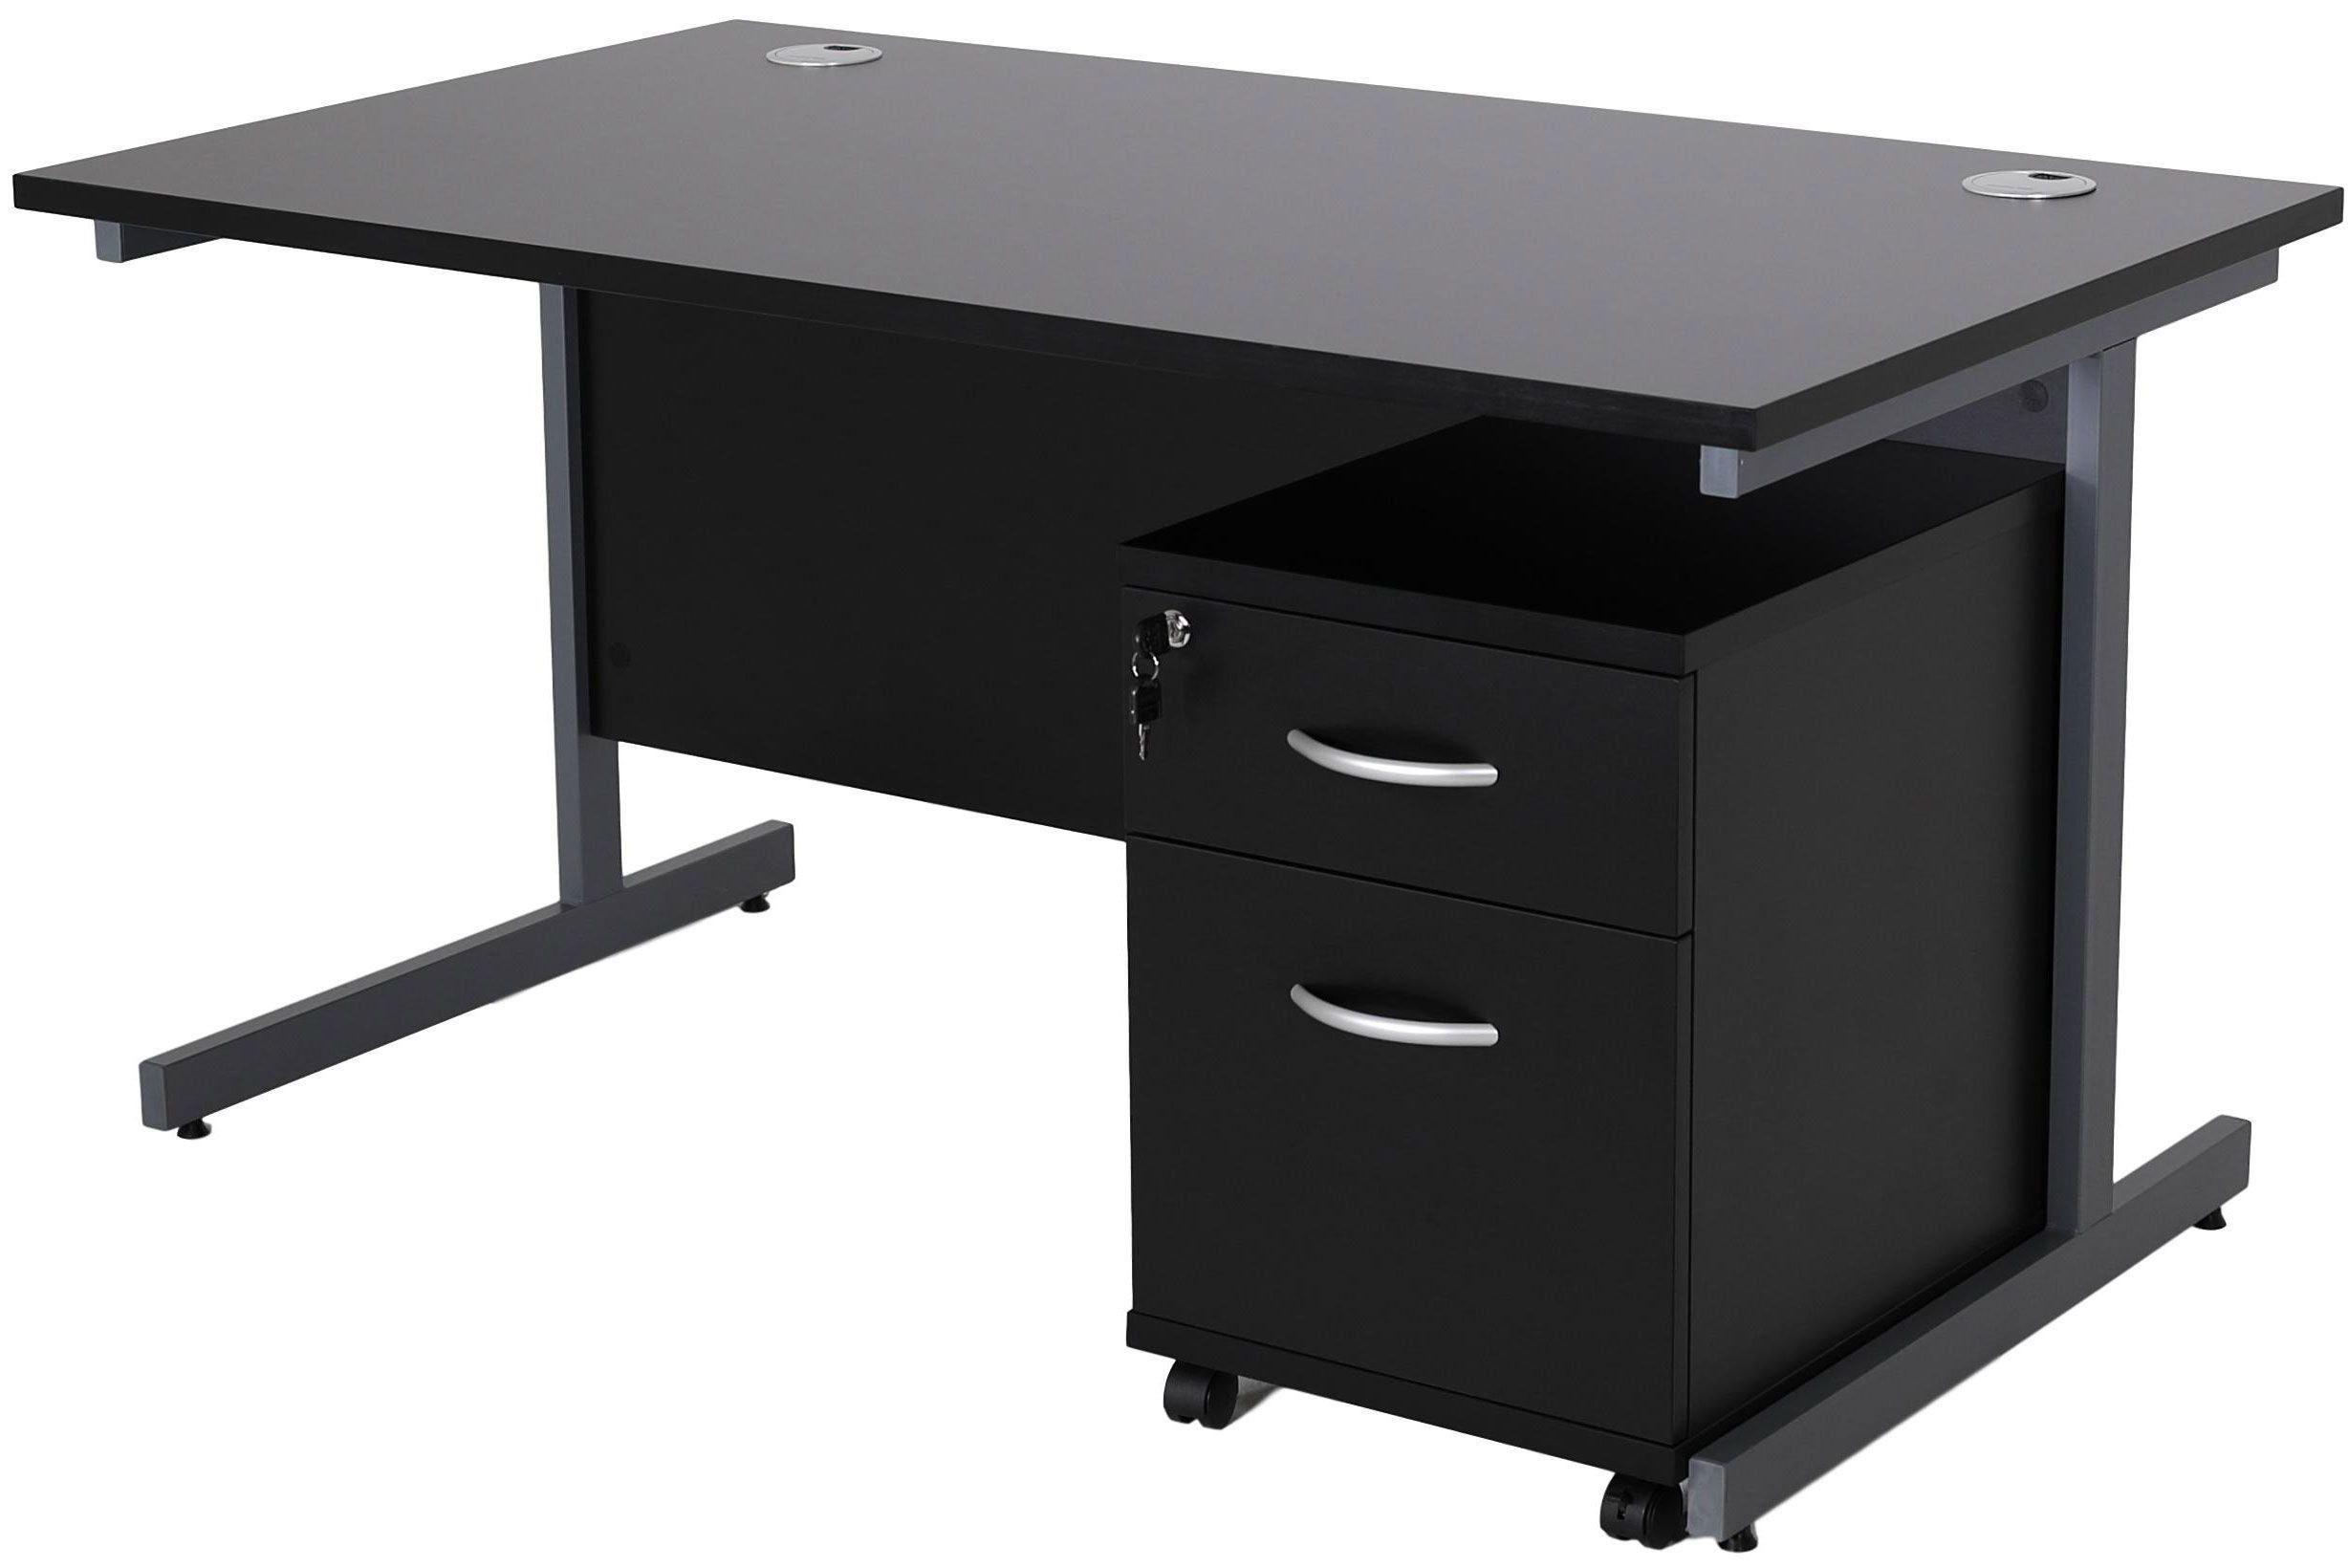 2019 Graphite 2 Drawer Compact Desks Throughout Next Day Karbon K1 Rectangular Cantilever Office Desks With Low Mobile (View 13 of 15)